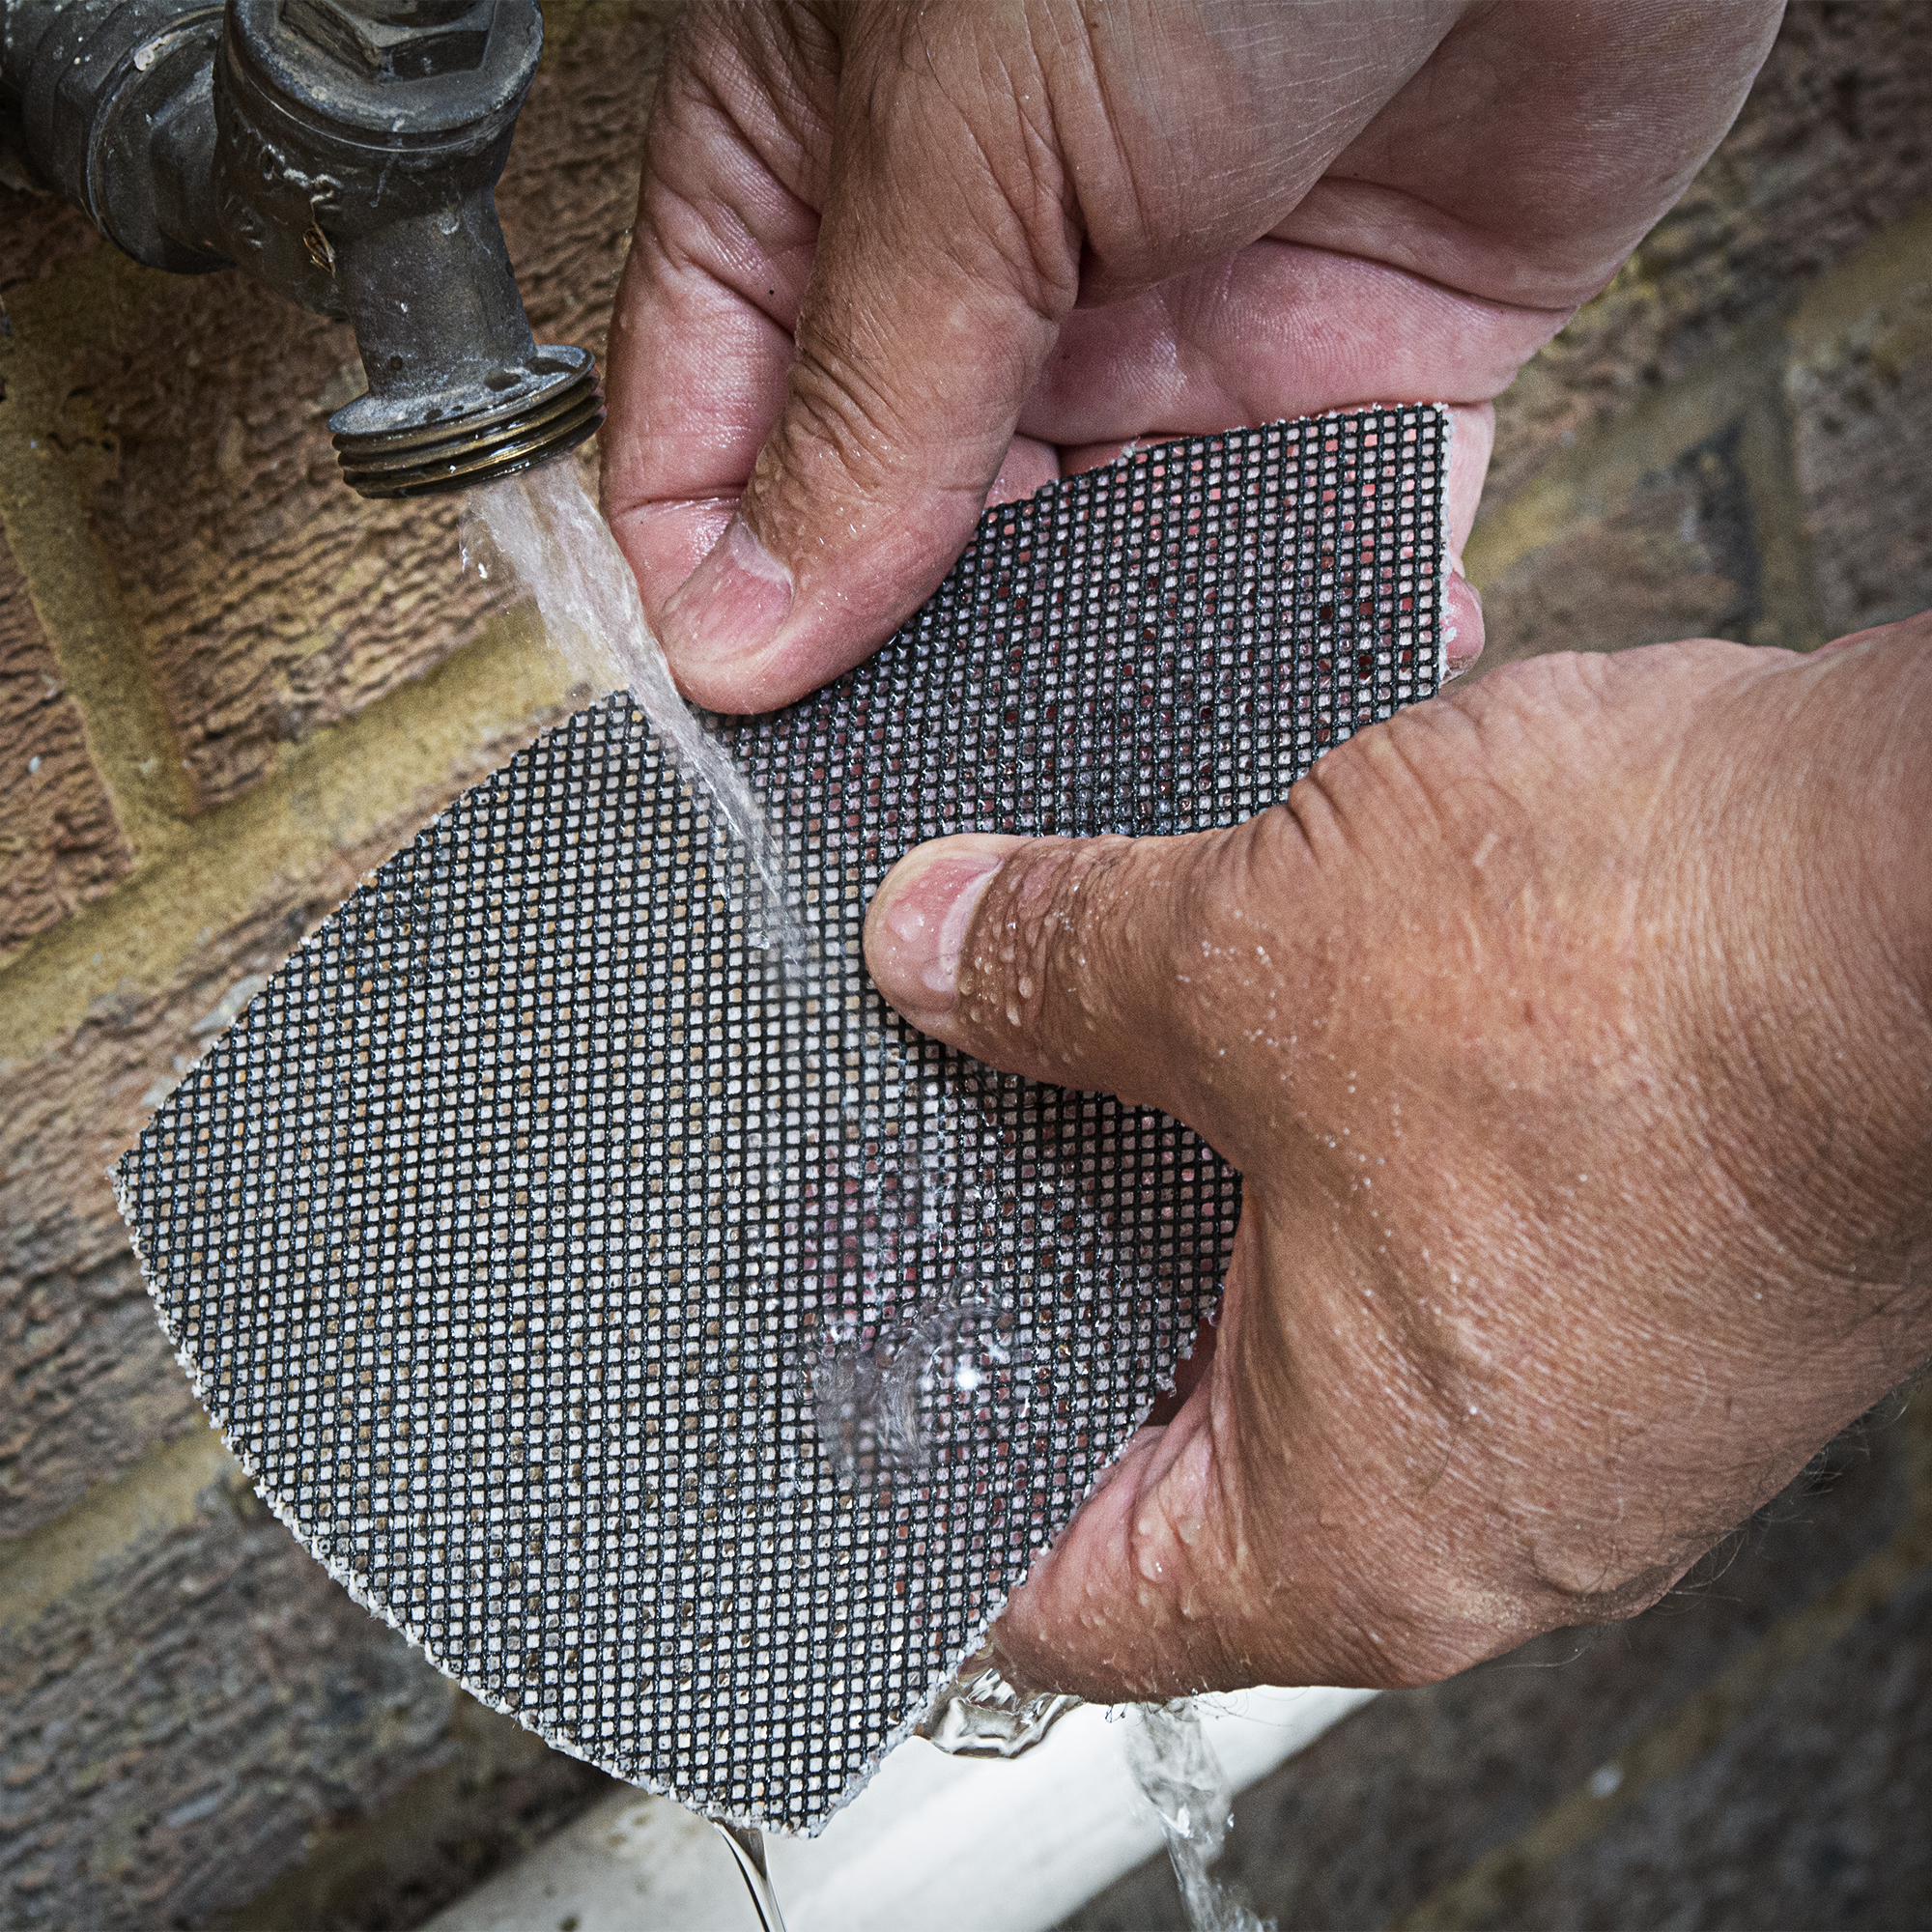 Two layers of resin keeps the abrasive grit firmly bonded to the backer for increased lifespan